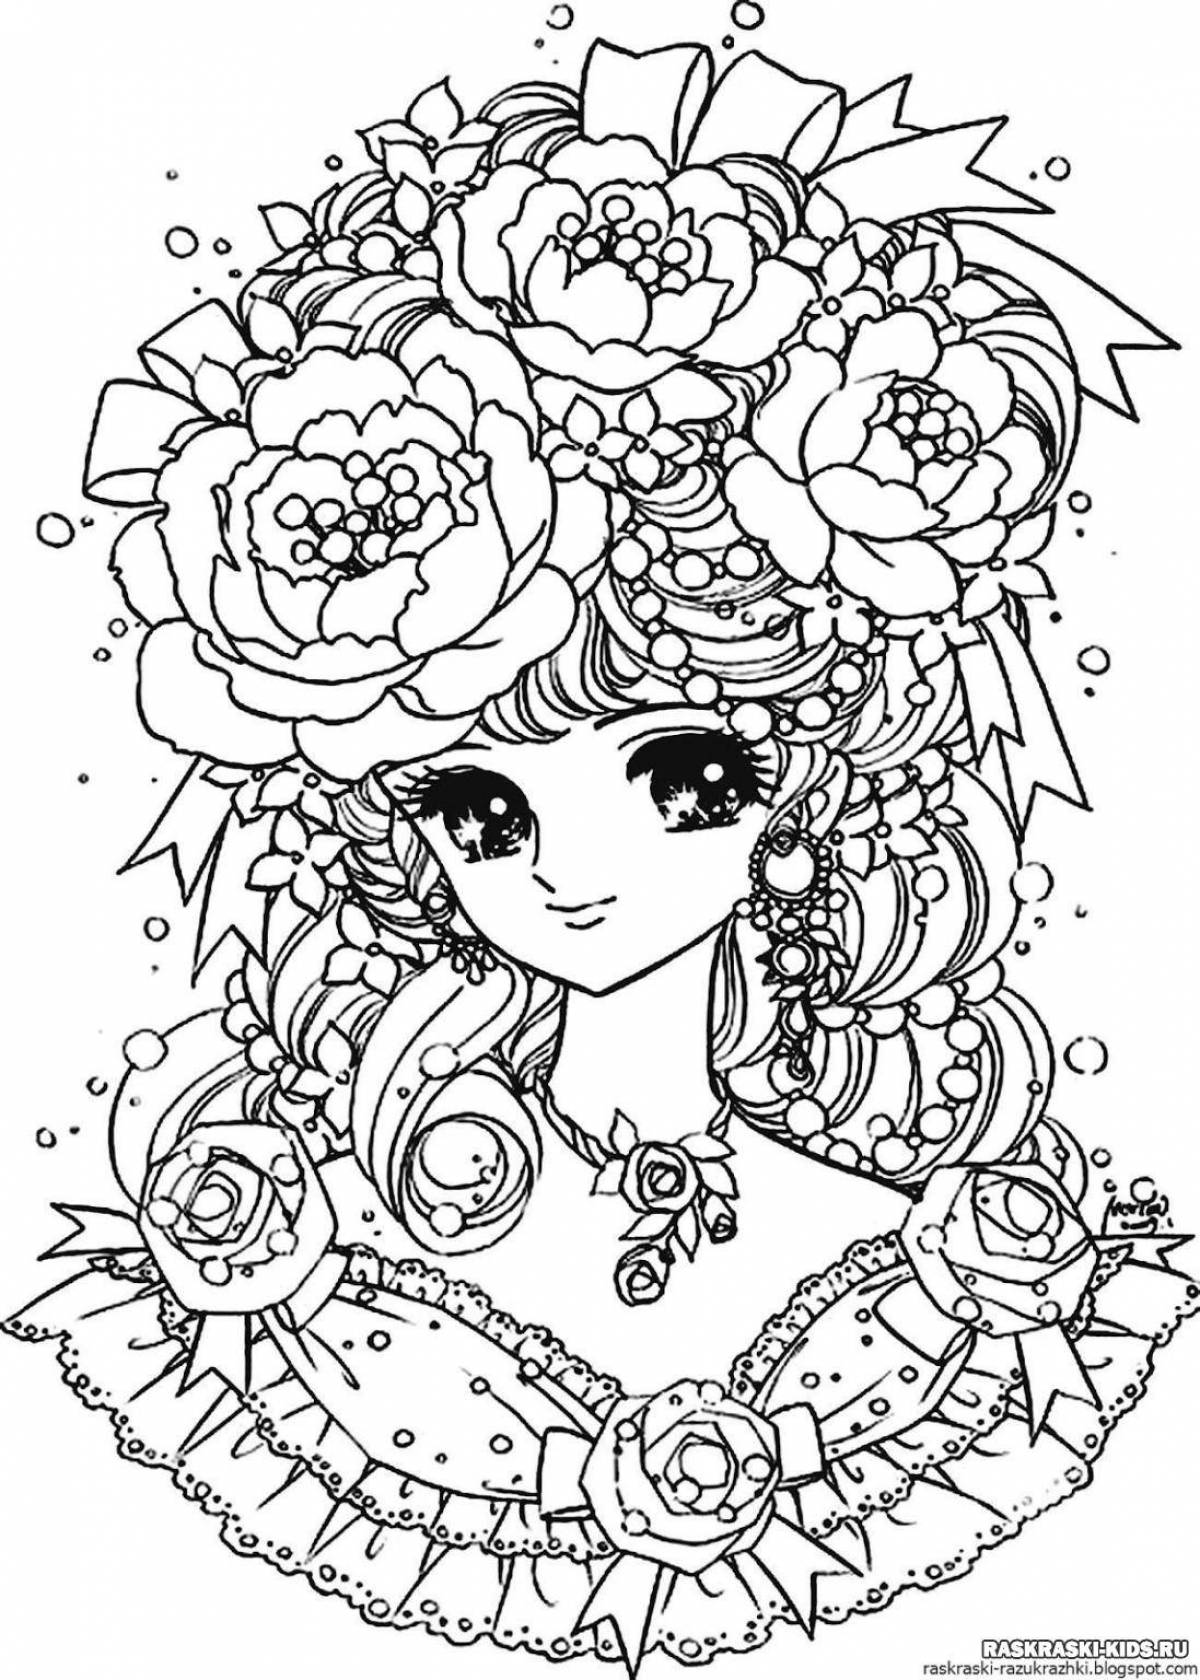 Decorated coloring book for girls 9-10 years old